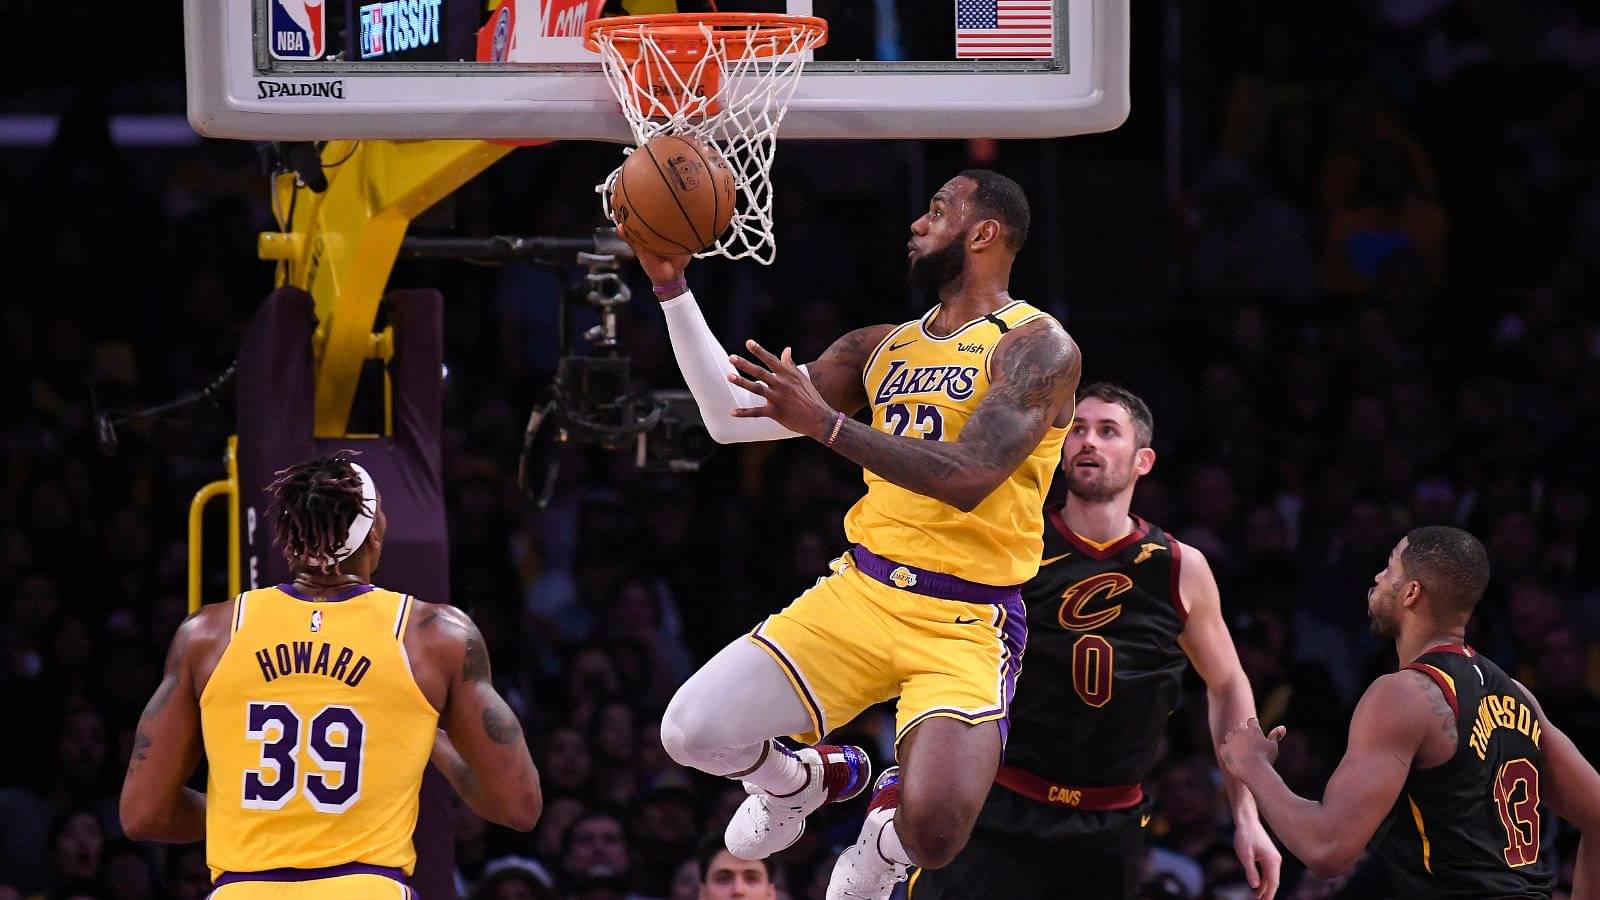 "If LeBron James Has 25 pts This Quarter, Don't Be Surprised": Kevin Love Was Warned by Cavaliers' Trainer Before Lakers Star Sank Them Alone